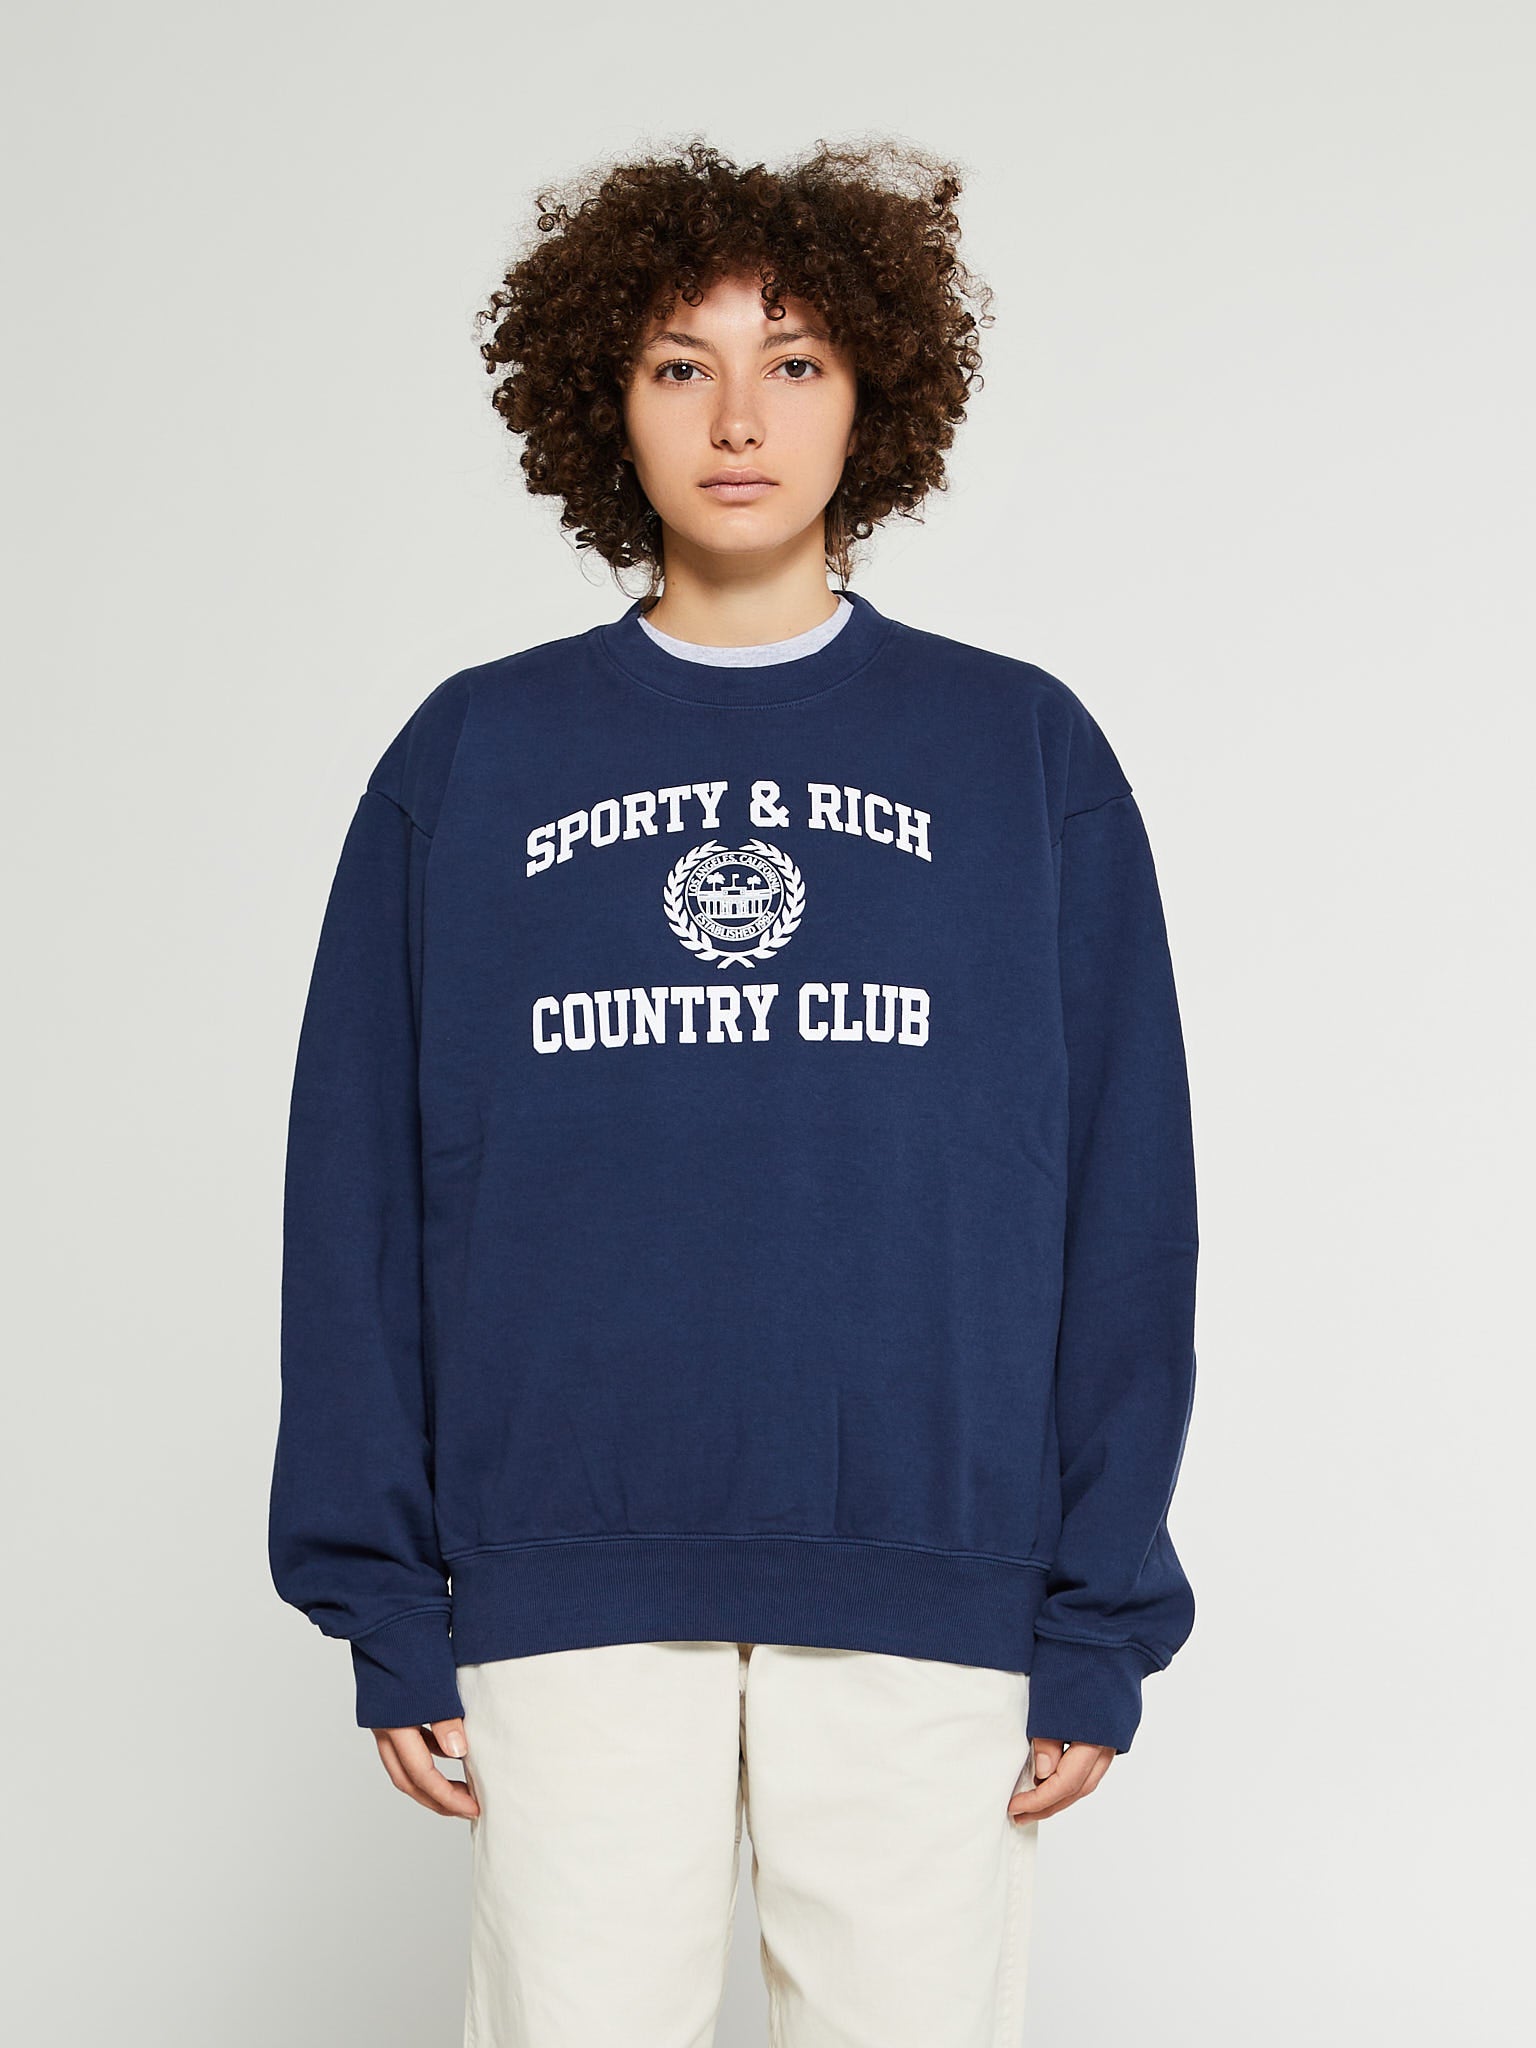 Sporty & Rich - Varsity Crest Crewneck in Navy and White